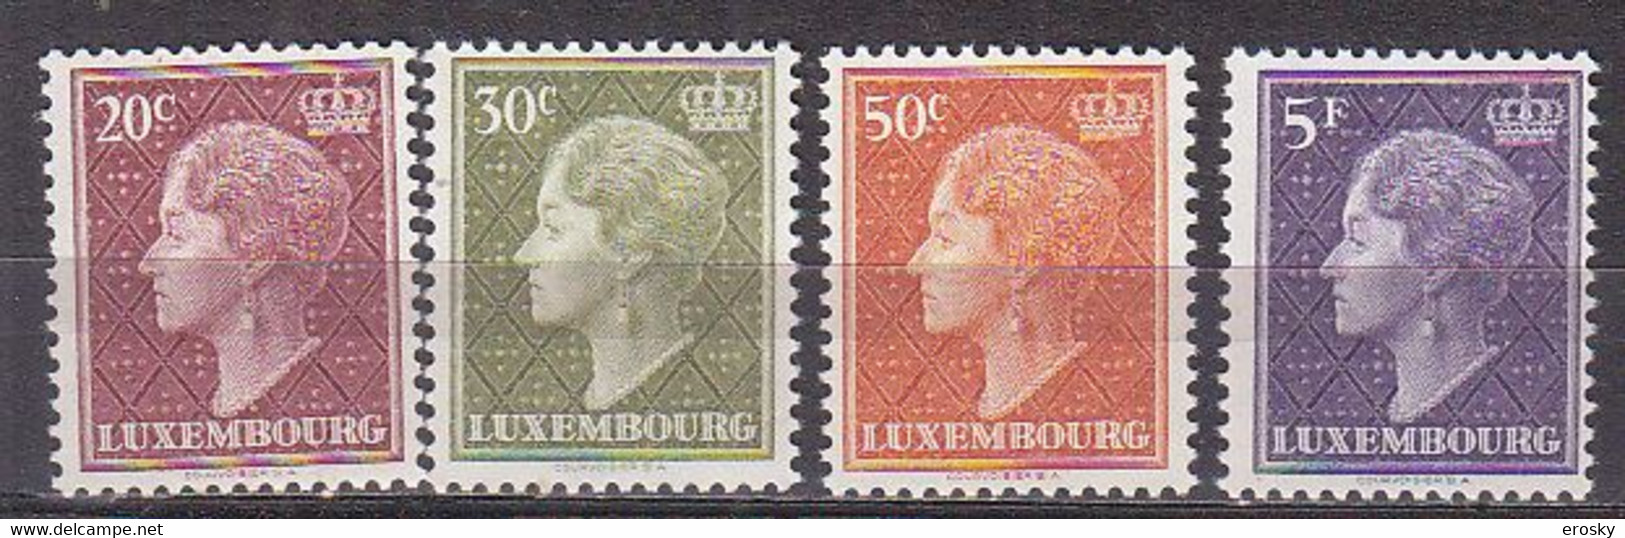 Q3143 - LUXEMBOURG Yv N°544A/47 ** - 1948-58 Charlotte Linksprofil